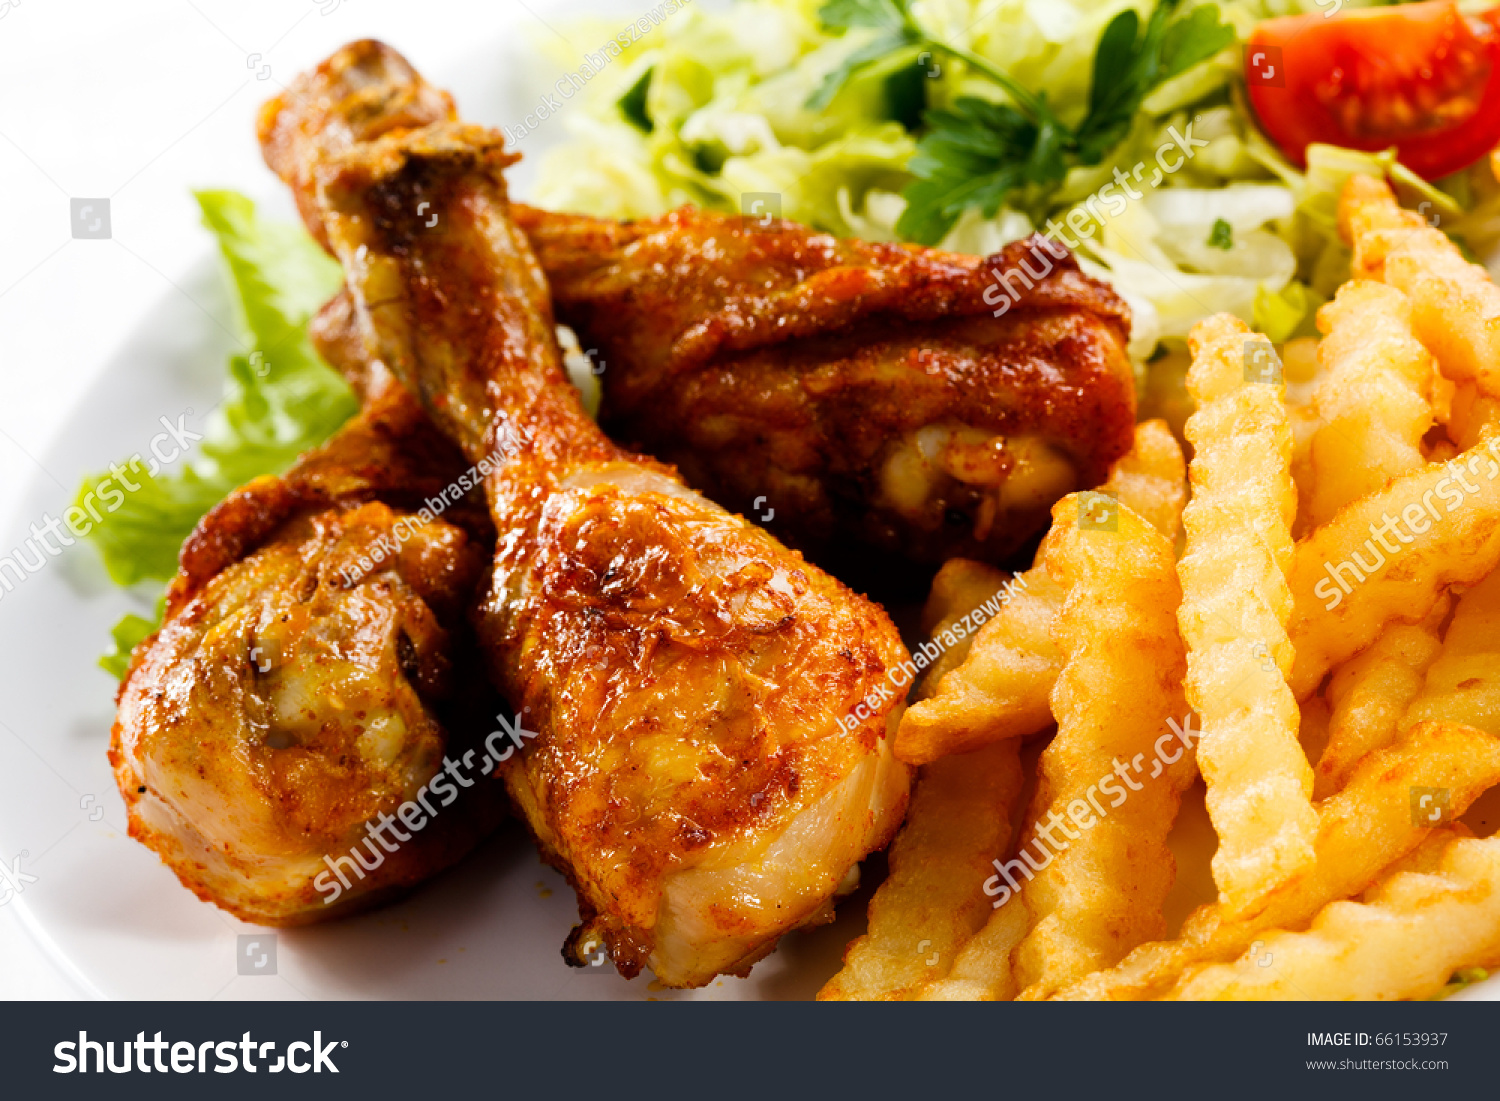 Grilled Chicken Drumstick, French Fries And Vegetables Stock Photo ...